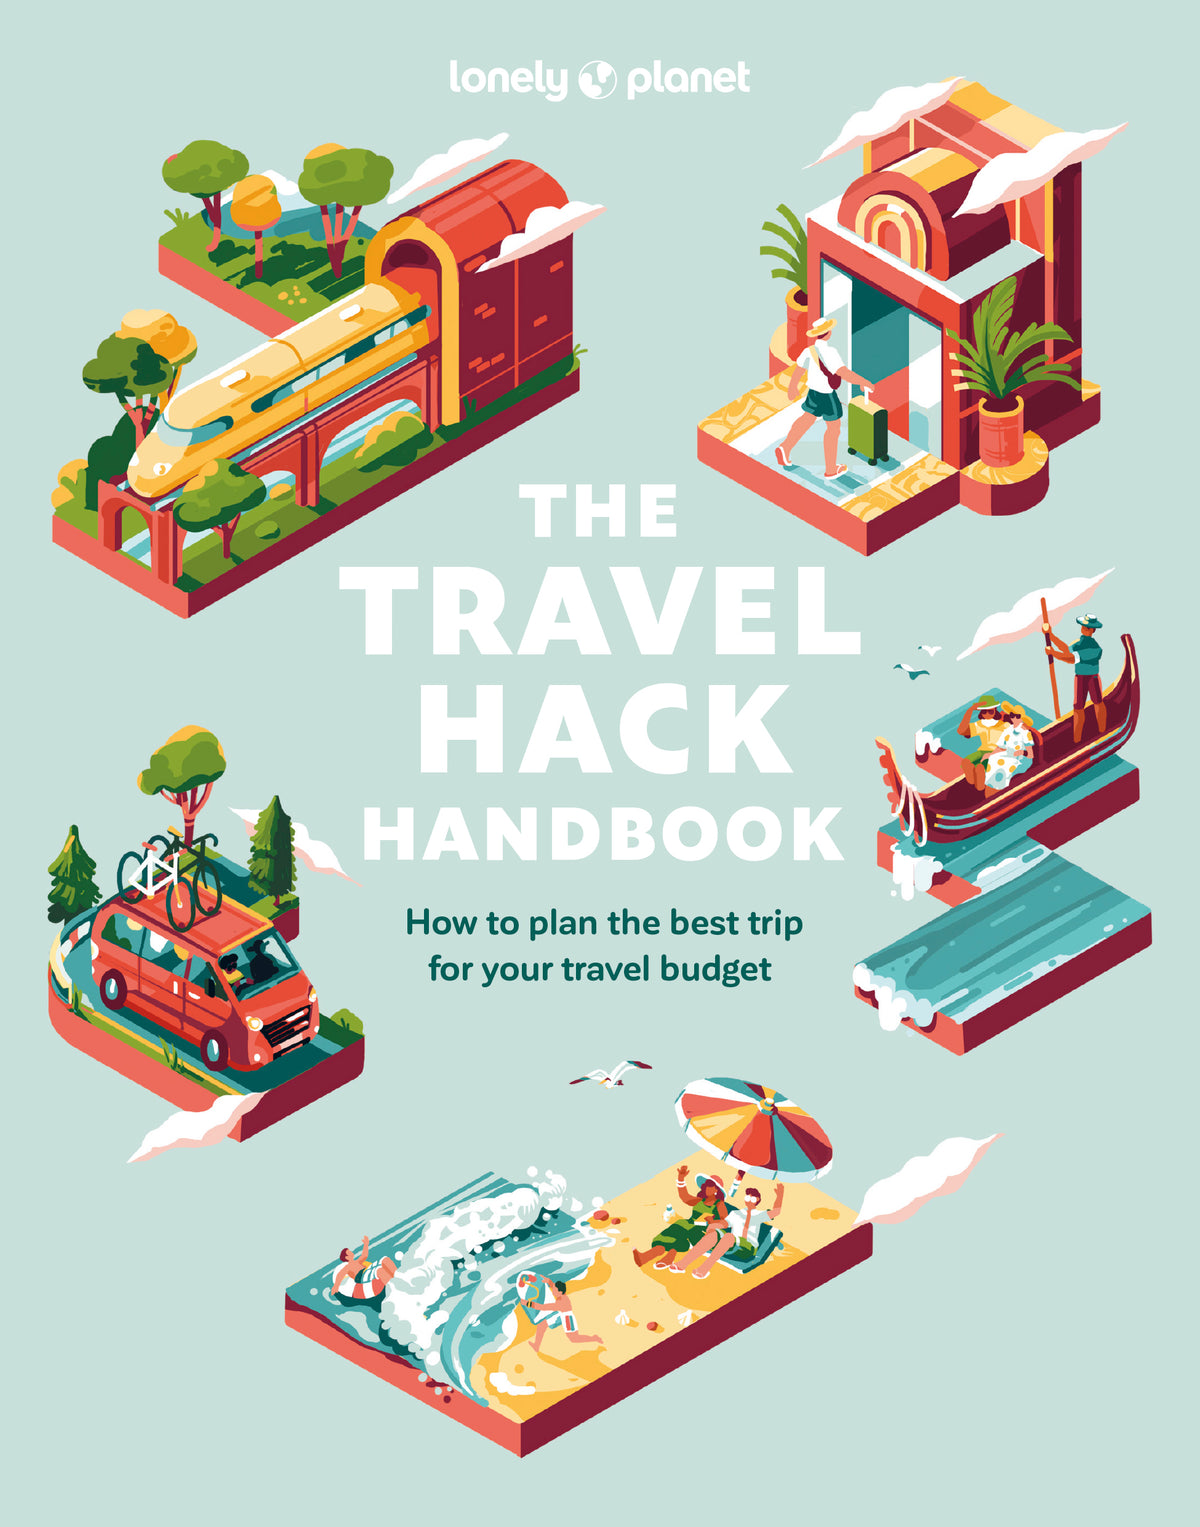 Travel accessories you can make at home - Lonely Planet